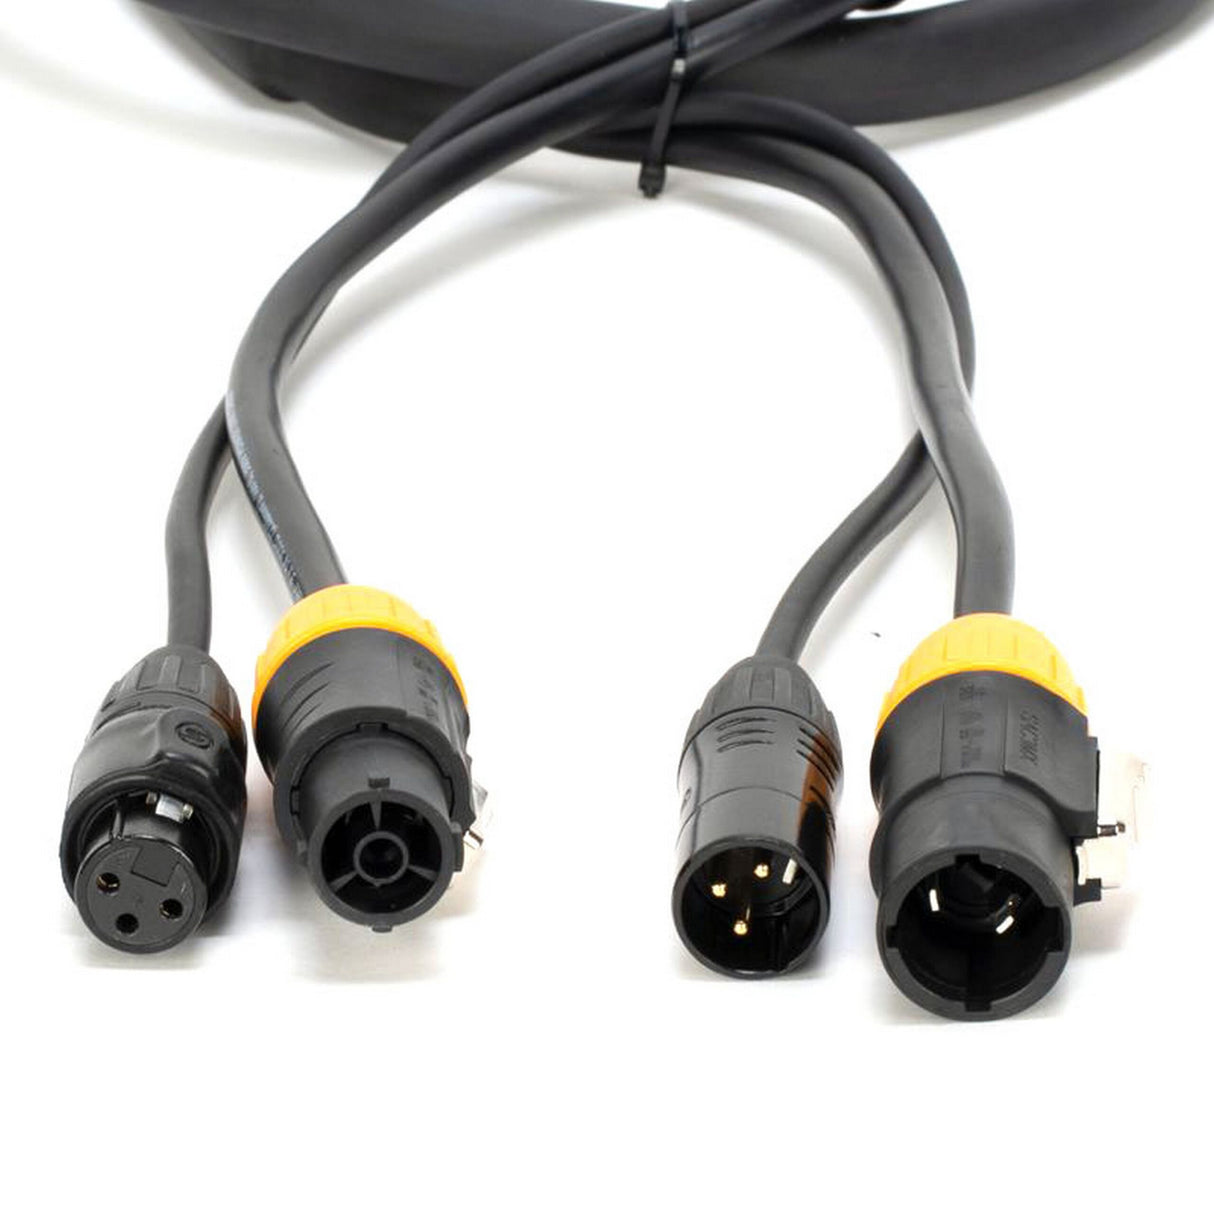 Accu Cable AC3PTRUE25 25-Foot Female to Male 3-Pin DMX/Locking Power Link Cable